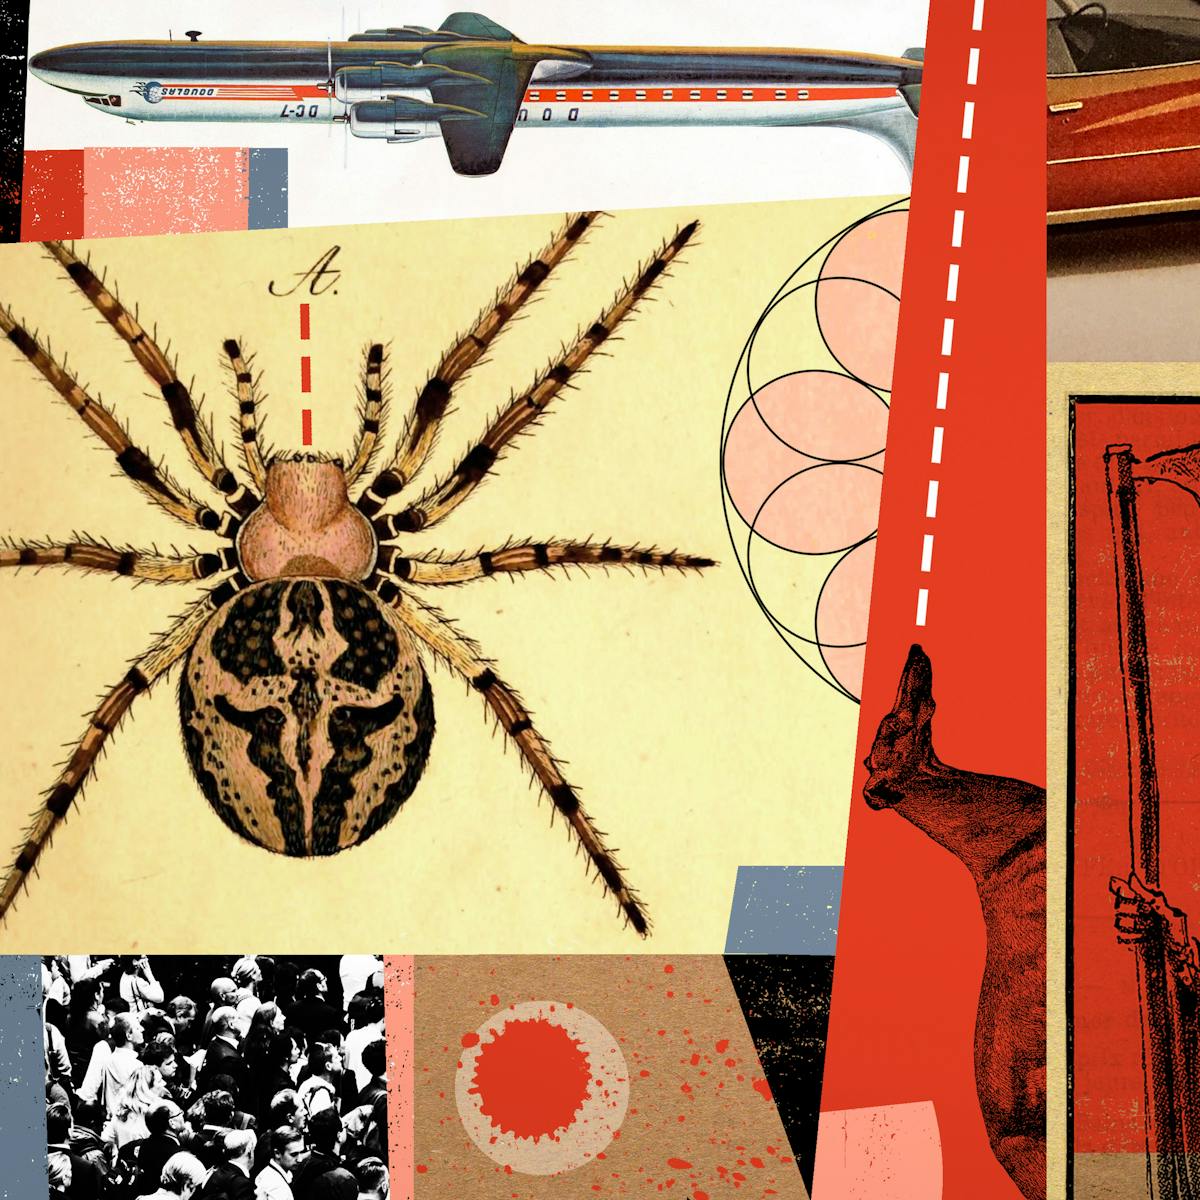 Digital montage artwork made up of archive illustrations, photographs and graphical shapes. The overall hues of the artwork are reds, yellows and blacks. There are a number of references across the artwork, some cut out, others framed in regular shapes, but all touching on the theme of phobias. There's a large spider, an aeroplane flying upside-down, a large crowd, a man trapped in a small box, a dog with a dashed white sightline coming from its head and an image of the grim reaper standing behind a man. 